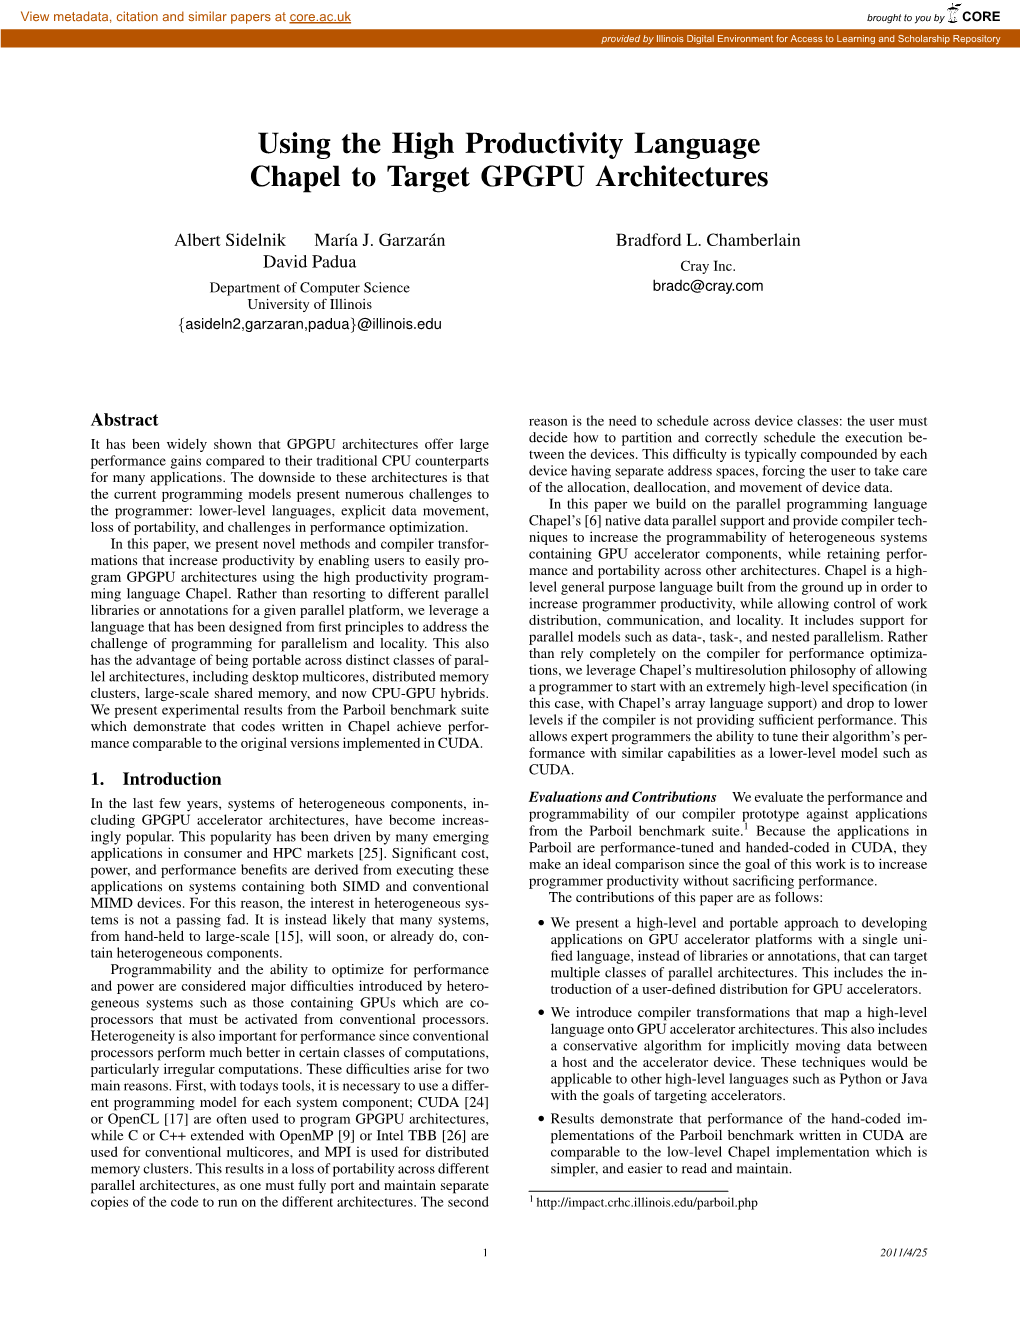 Using the High Productivity Language Chapel to Target GPGPU Architectures